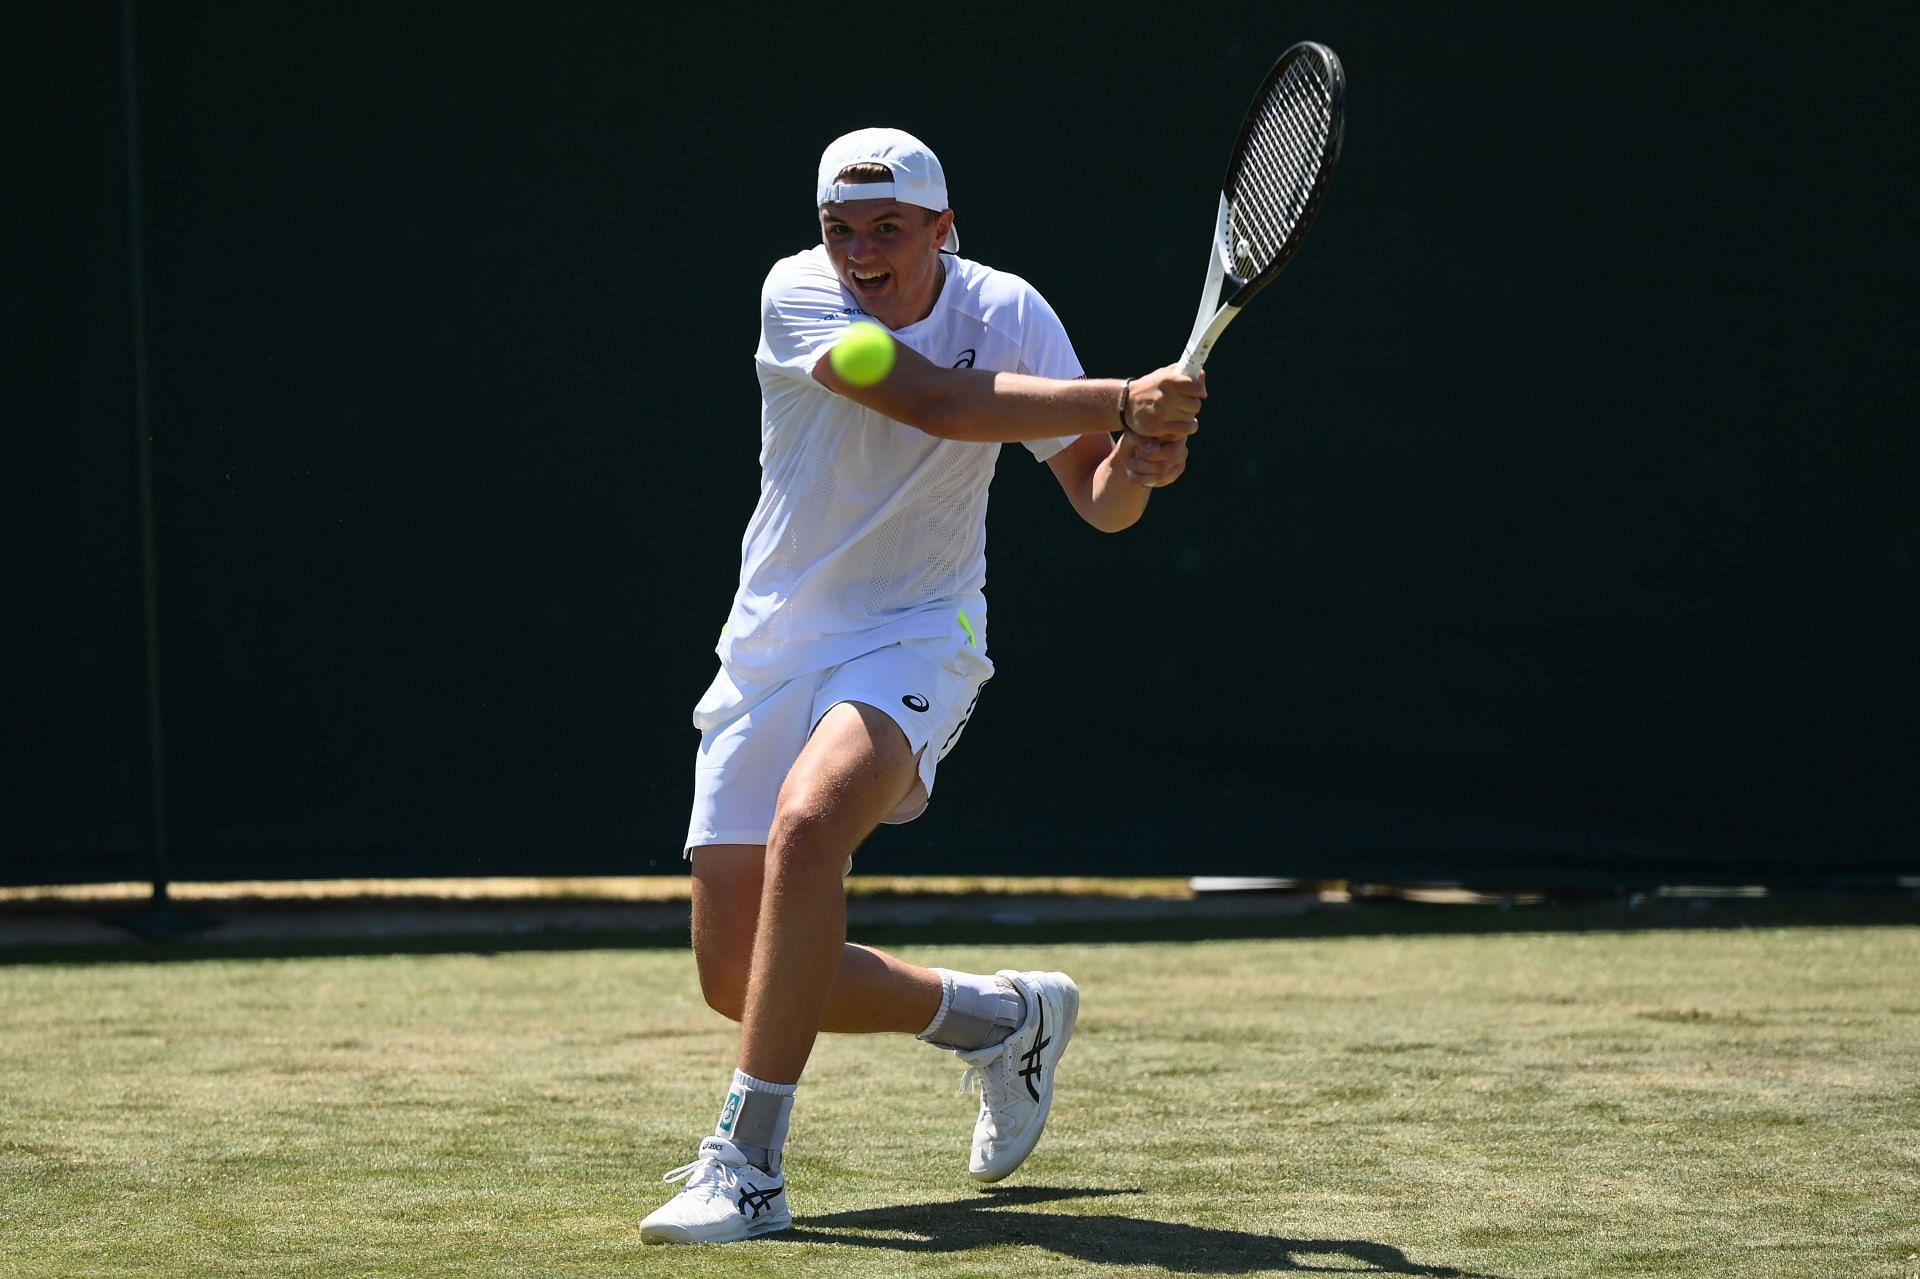 Dominic Stricker in action during the Wimbledon qualifiers